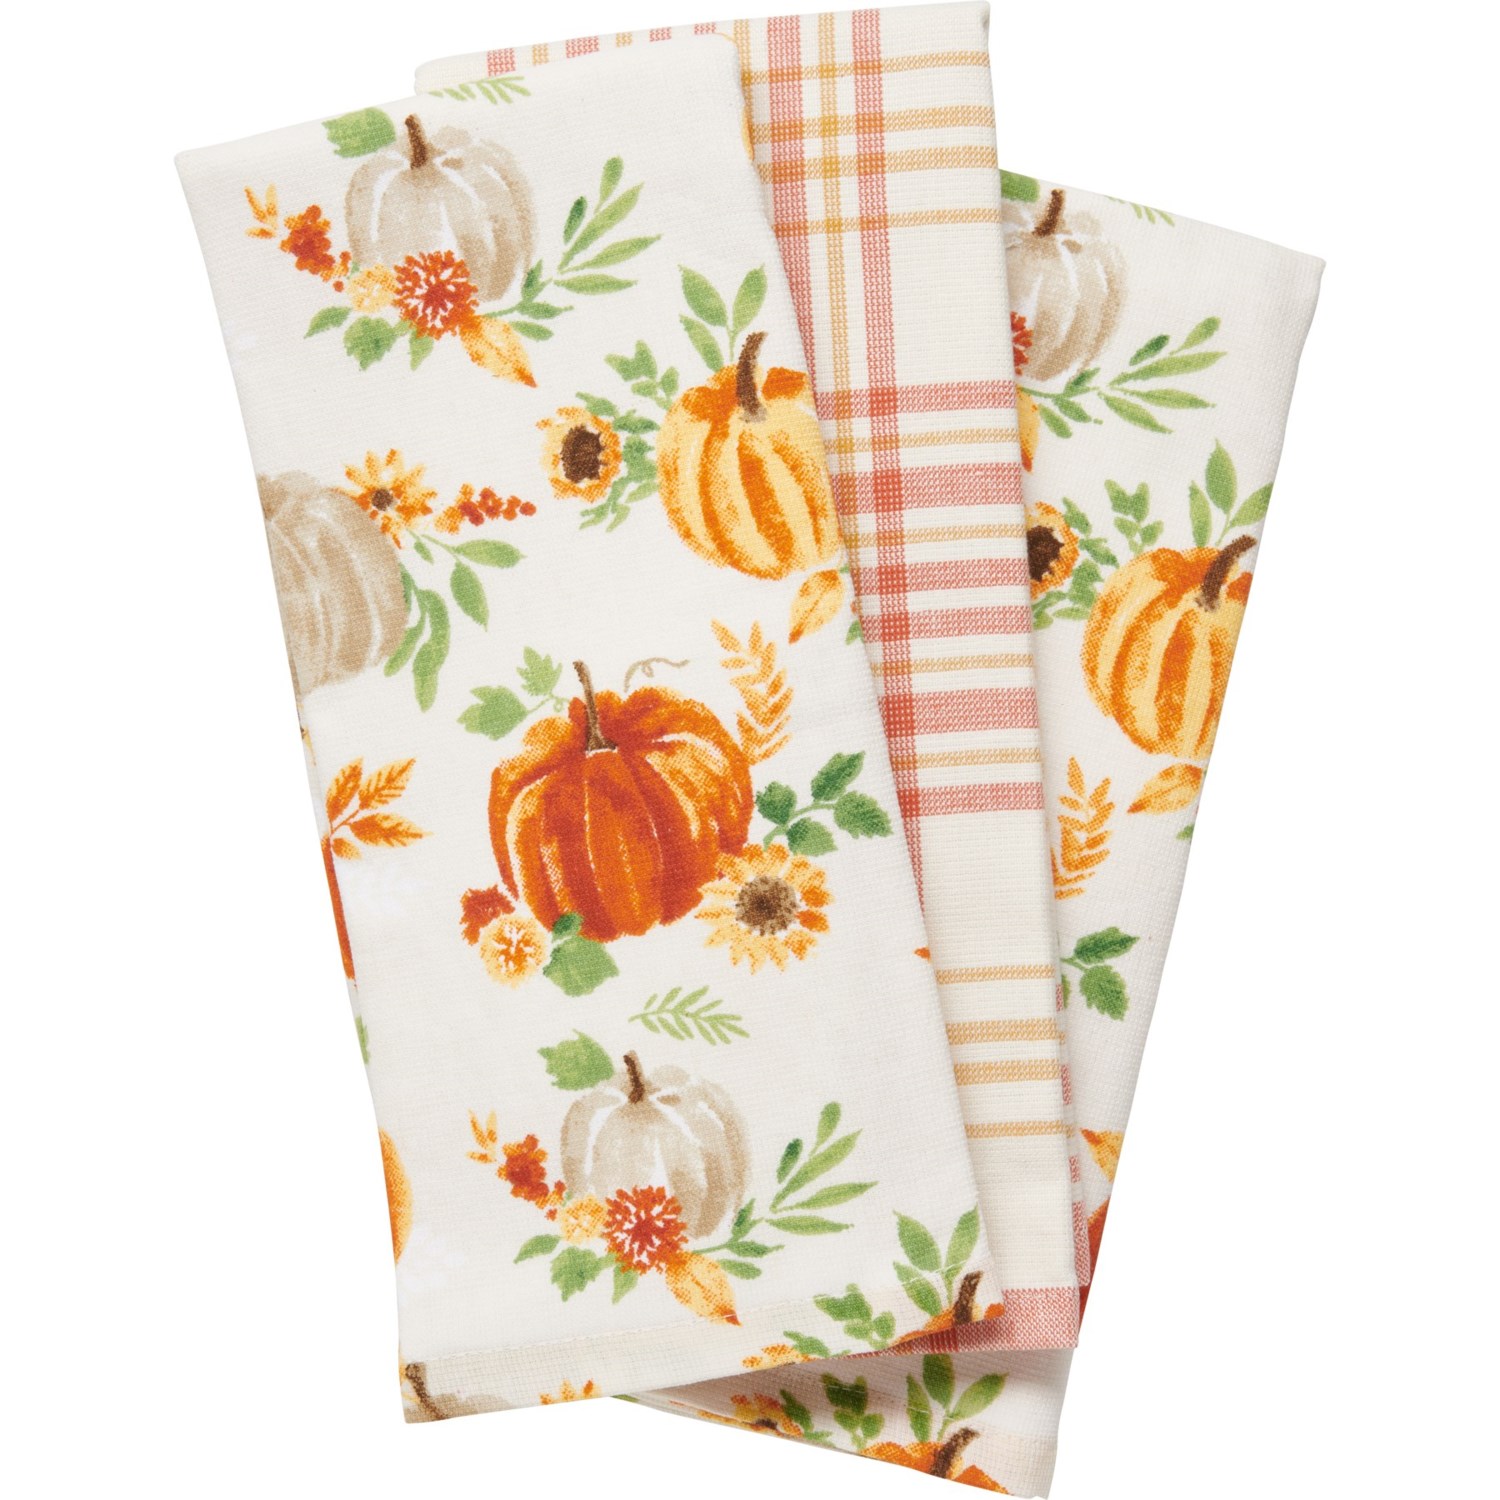 Cynthia Rowley Harvest Flow Kitchen Towels - 3-Pack, Neutral - Save 44%